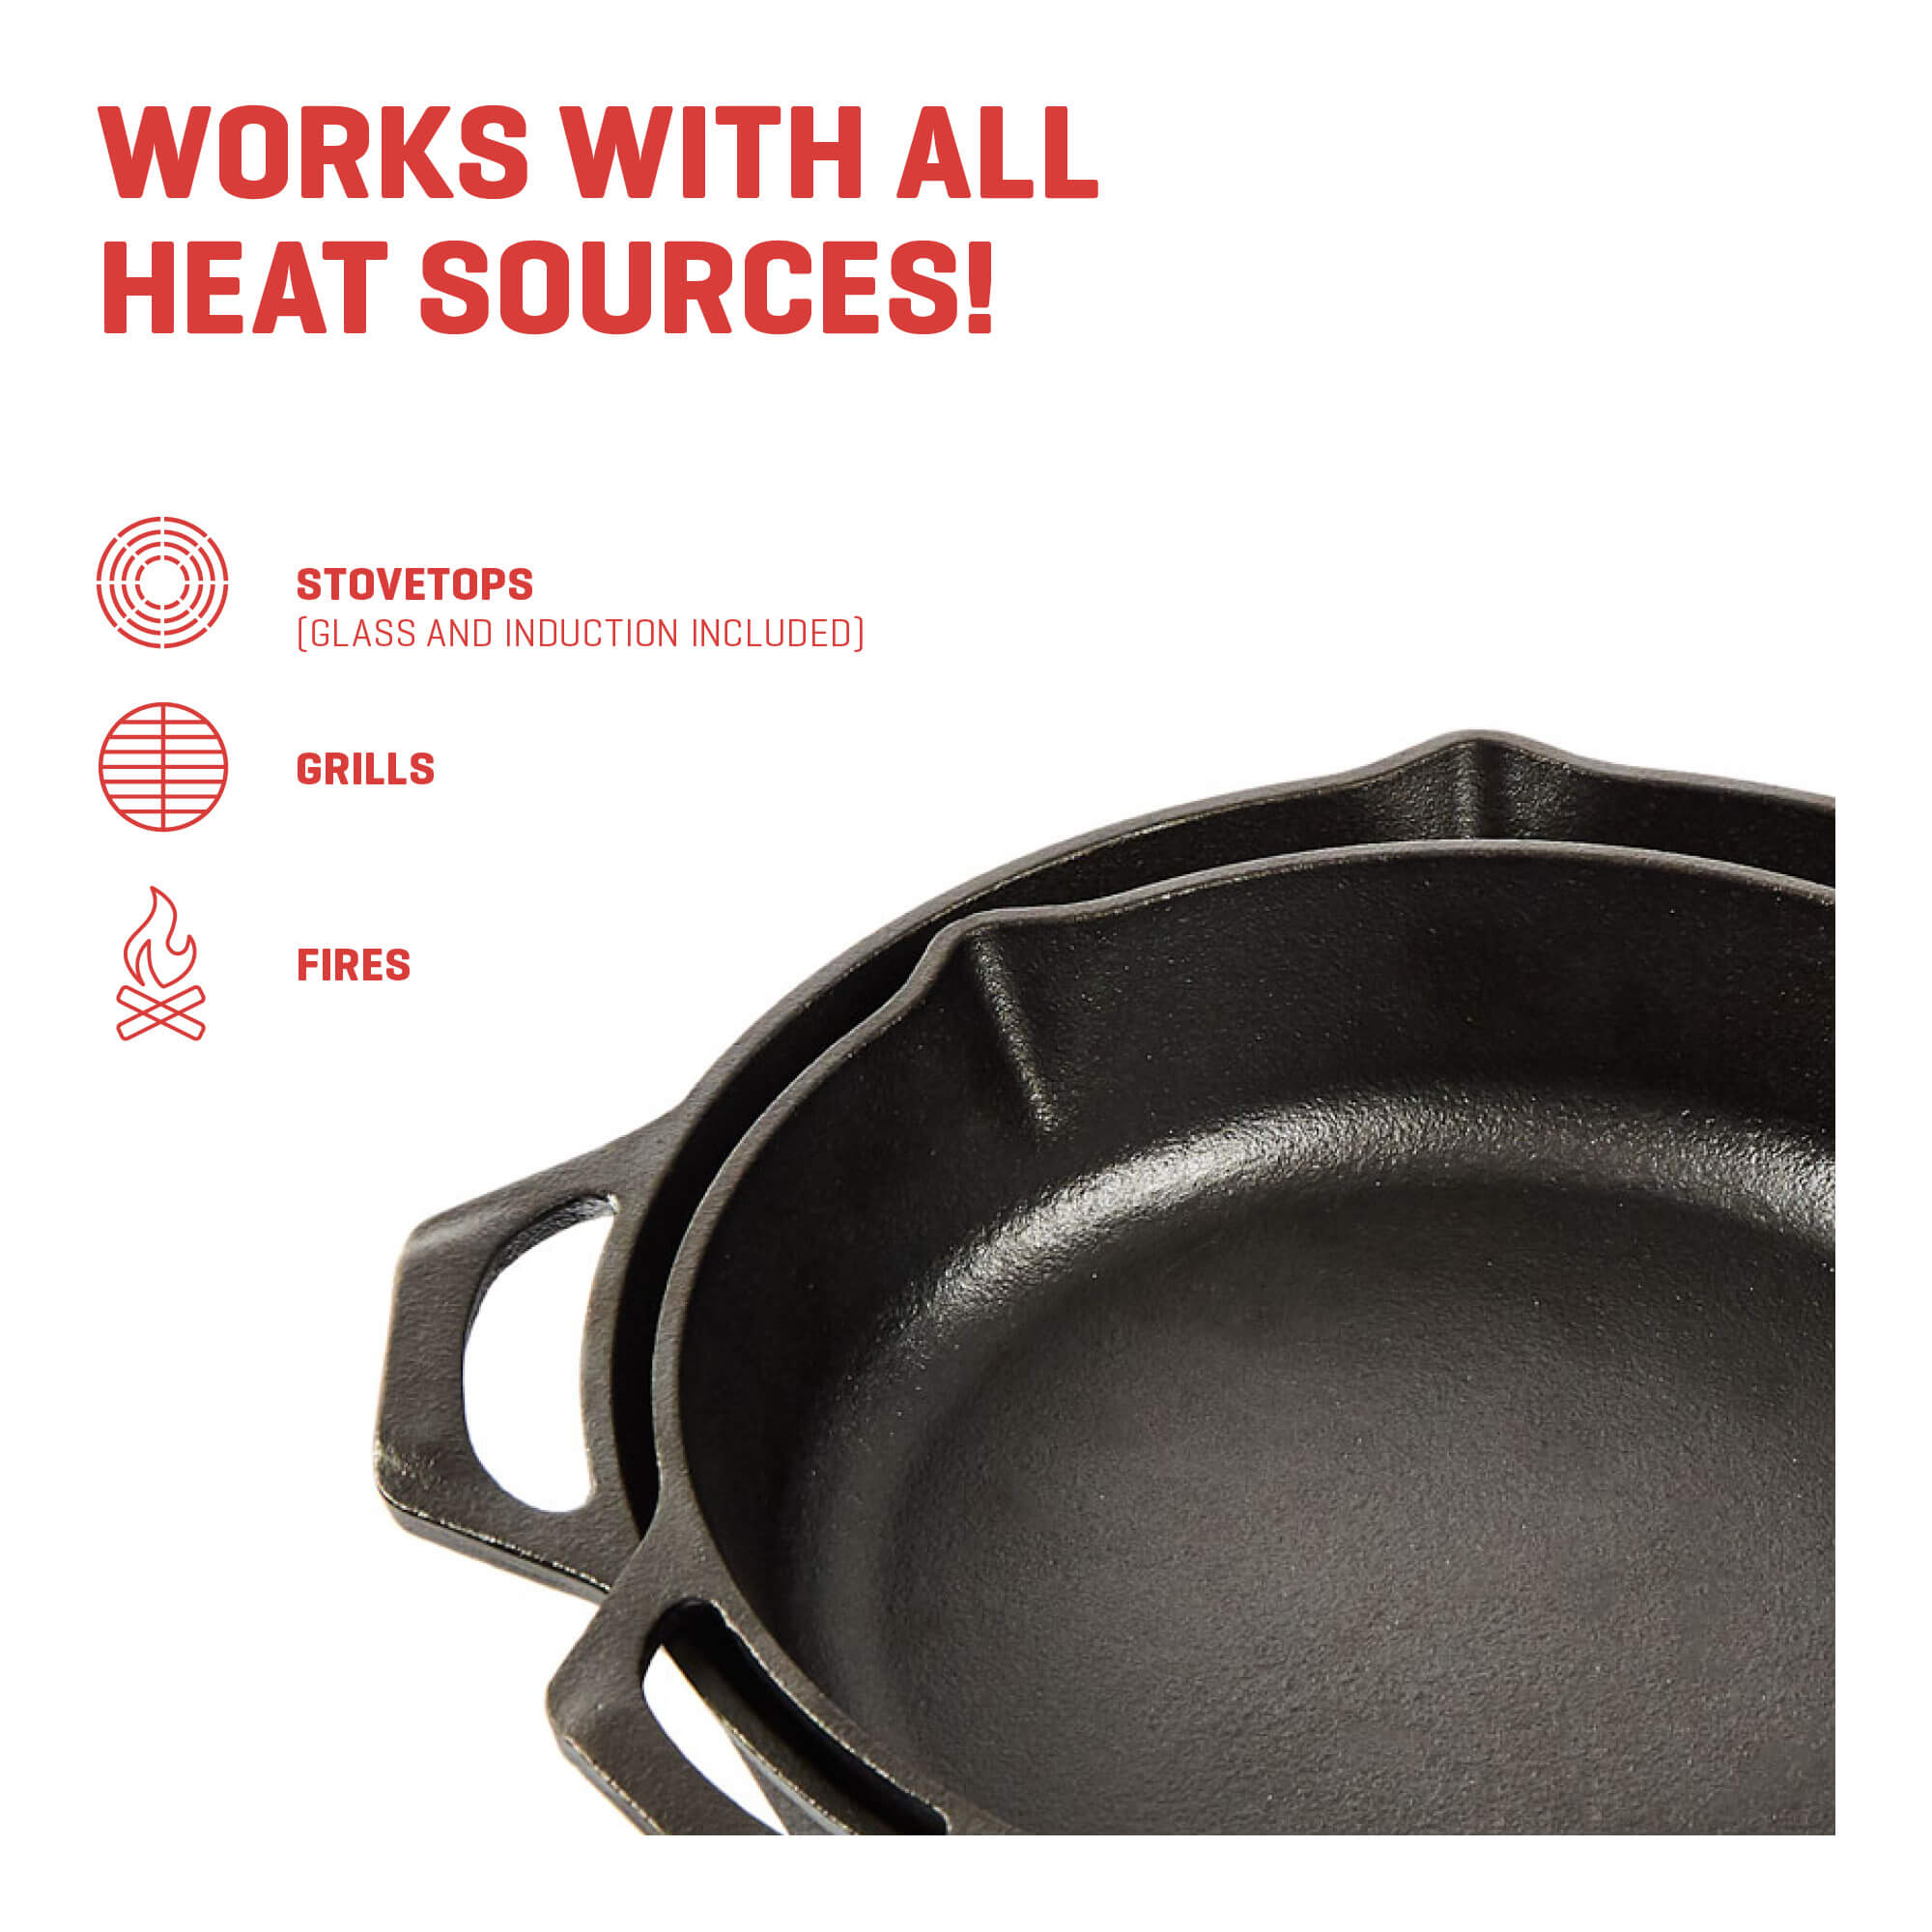 How to Use Cast Iron Over Any Heat Source